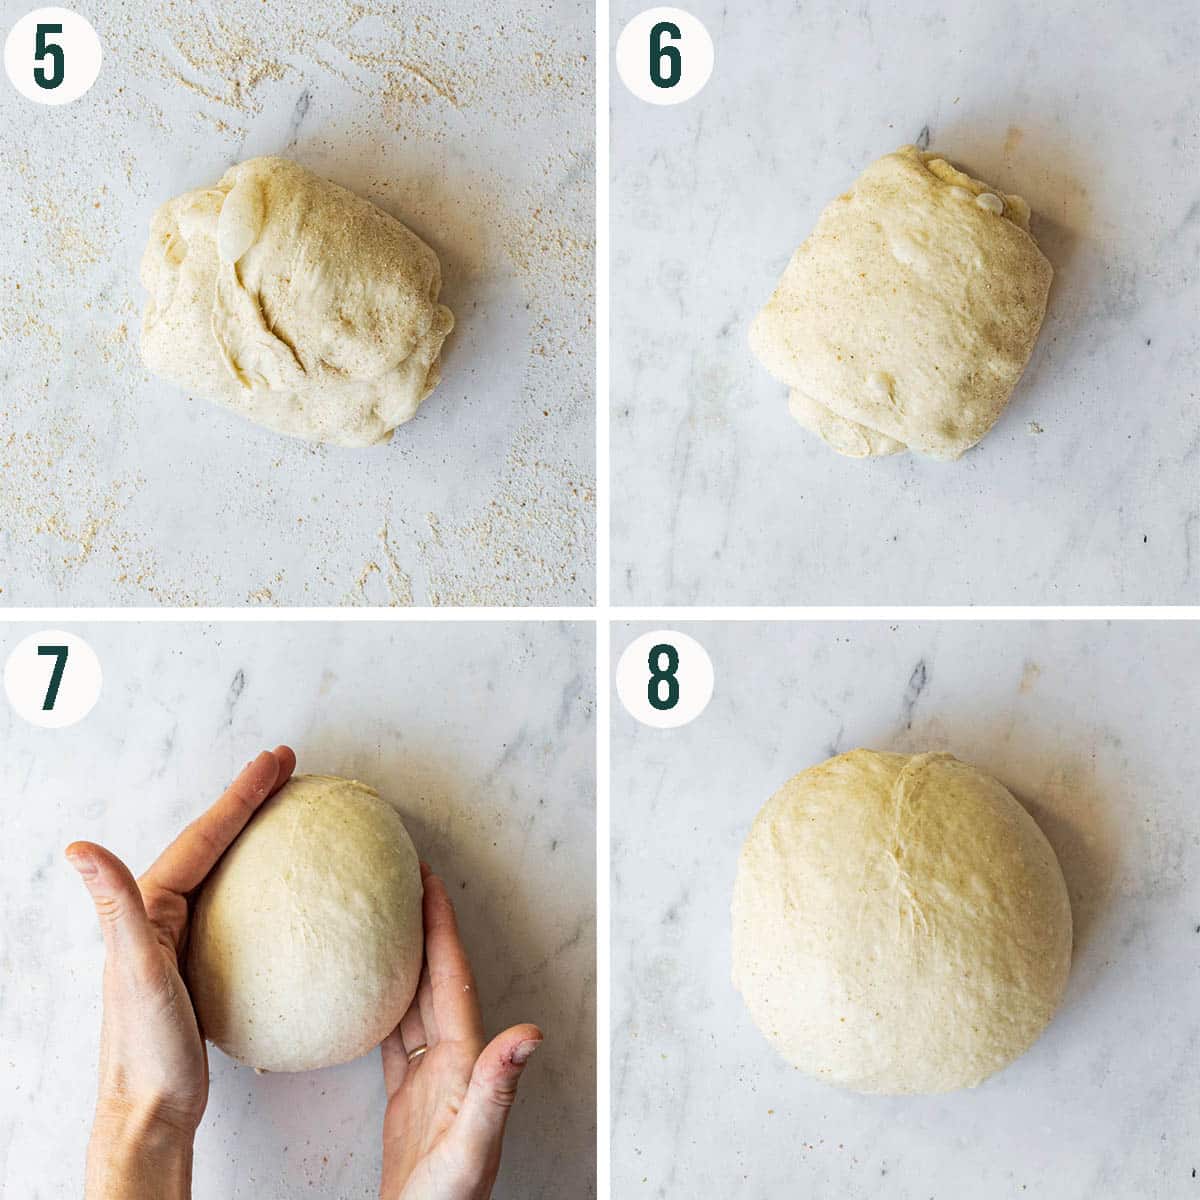 Shaping a boule steps 5 to 8, rotating the dough to create surface tension.